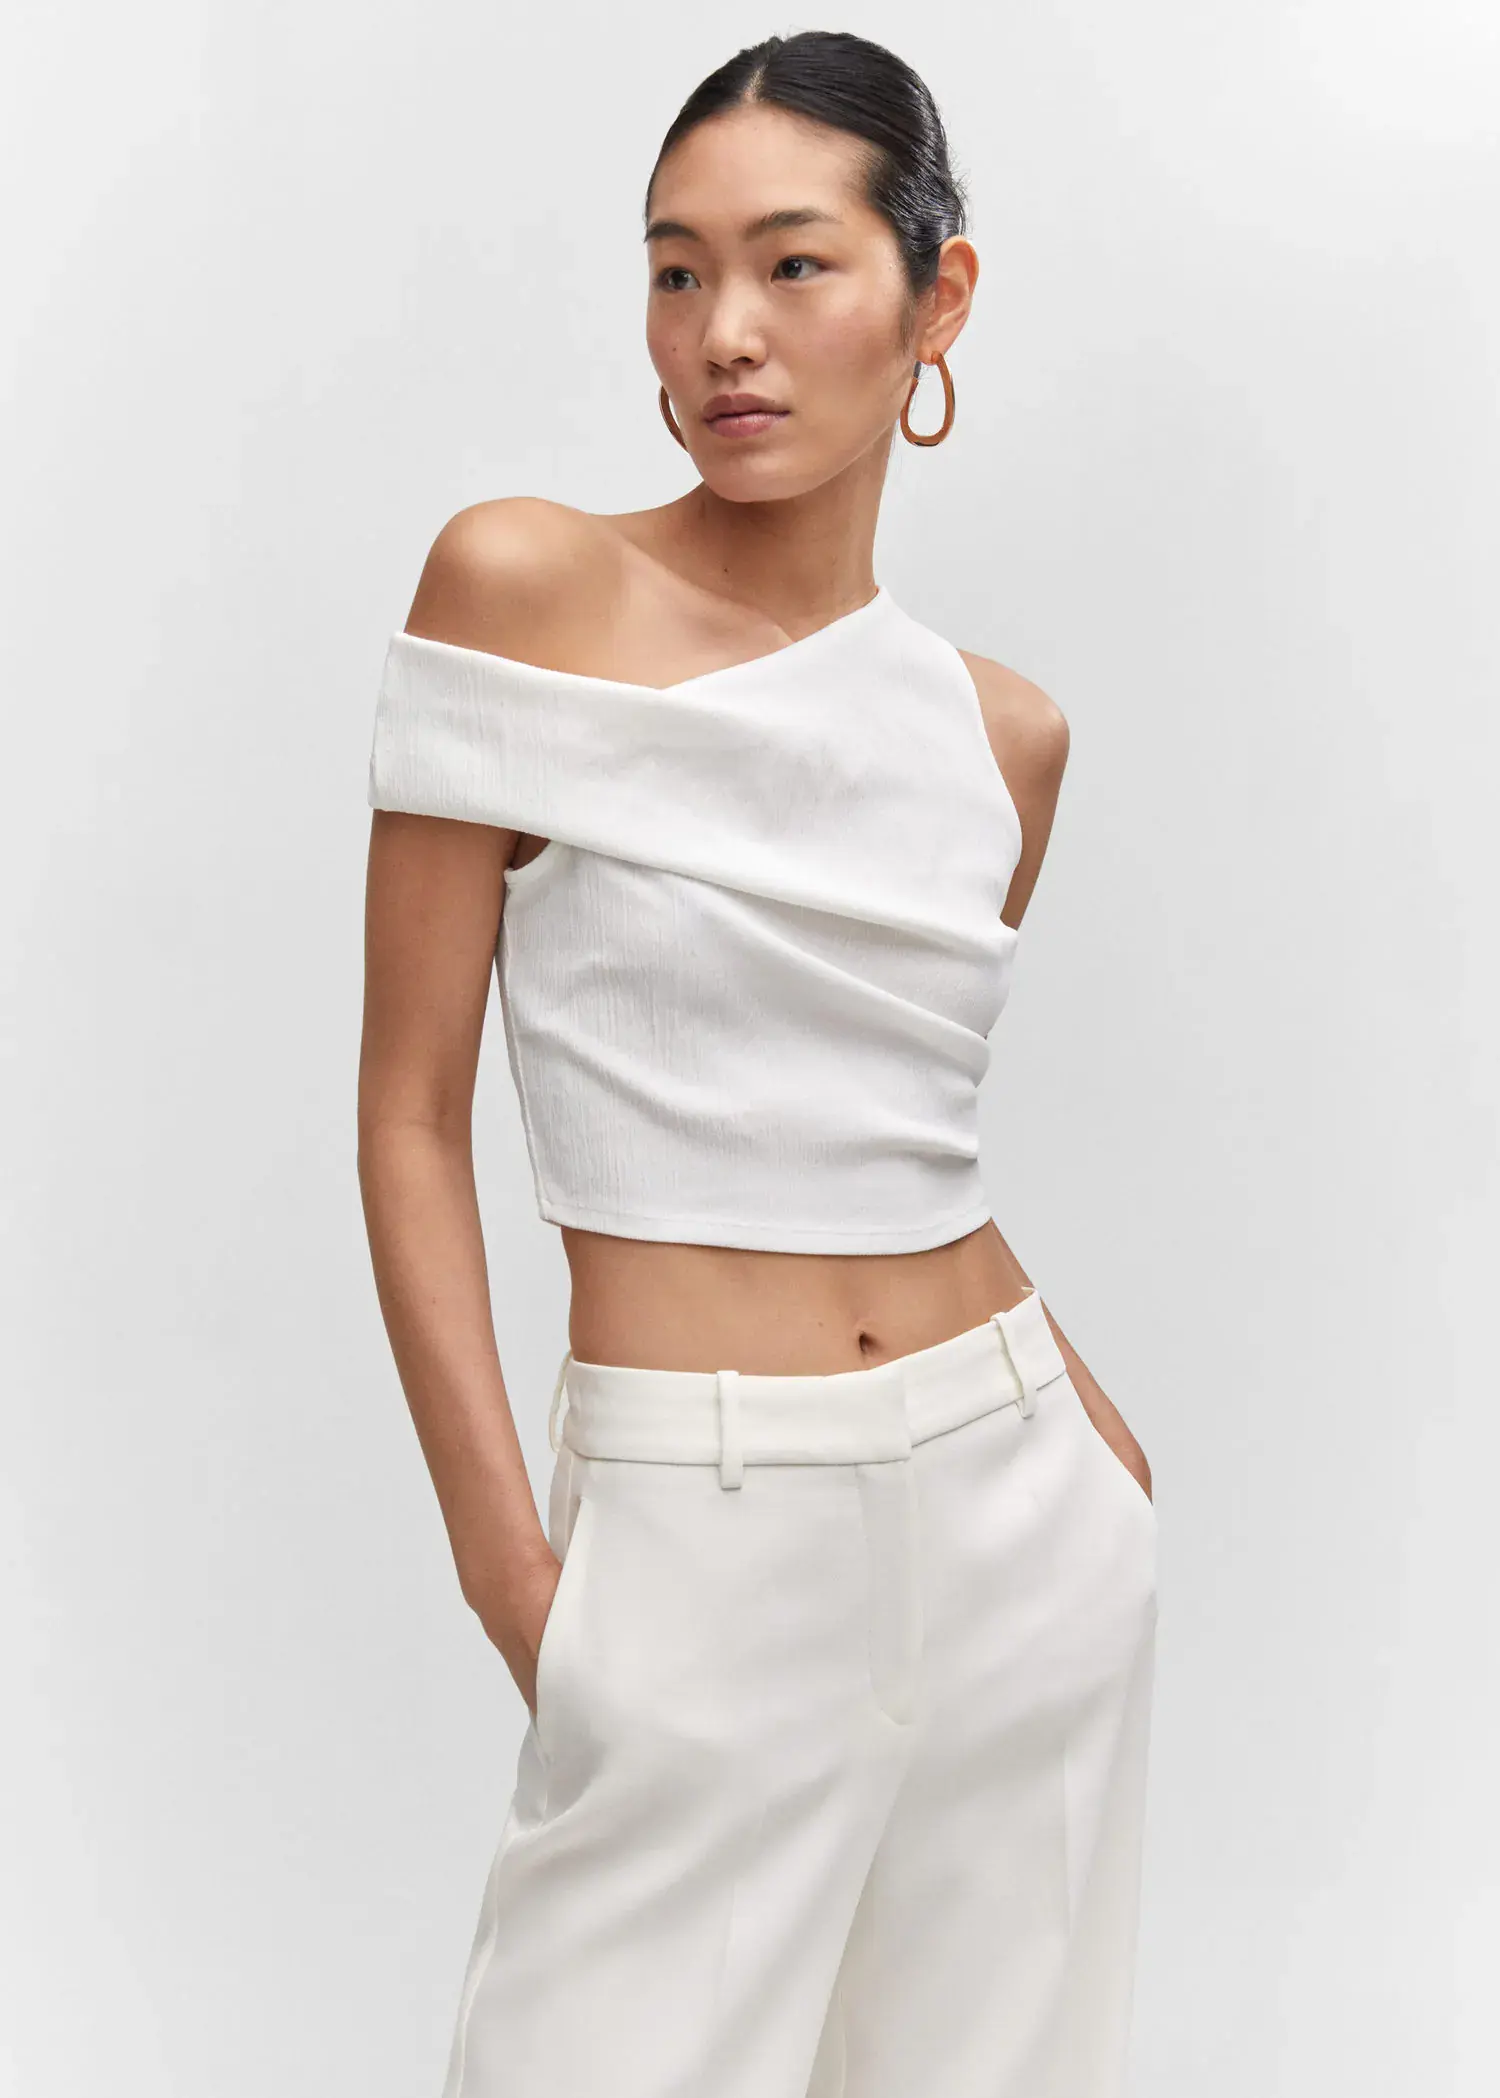 Mango Asymmetrical textured top. a woman in a white outfit posing for a picture. 